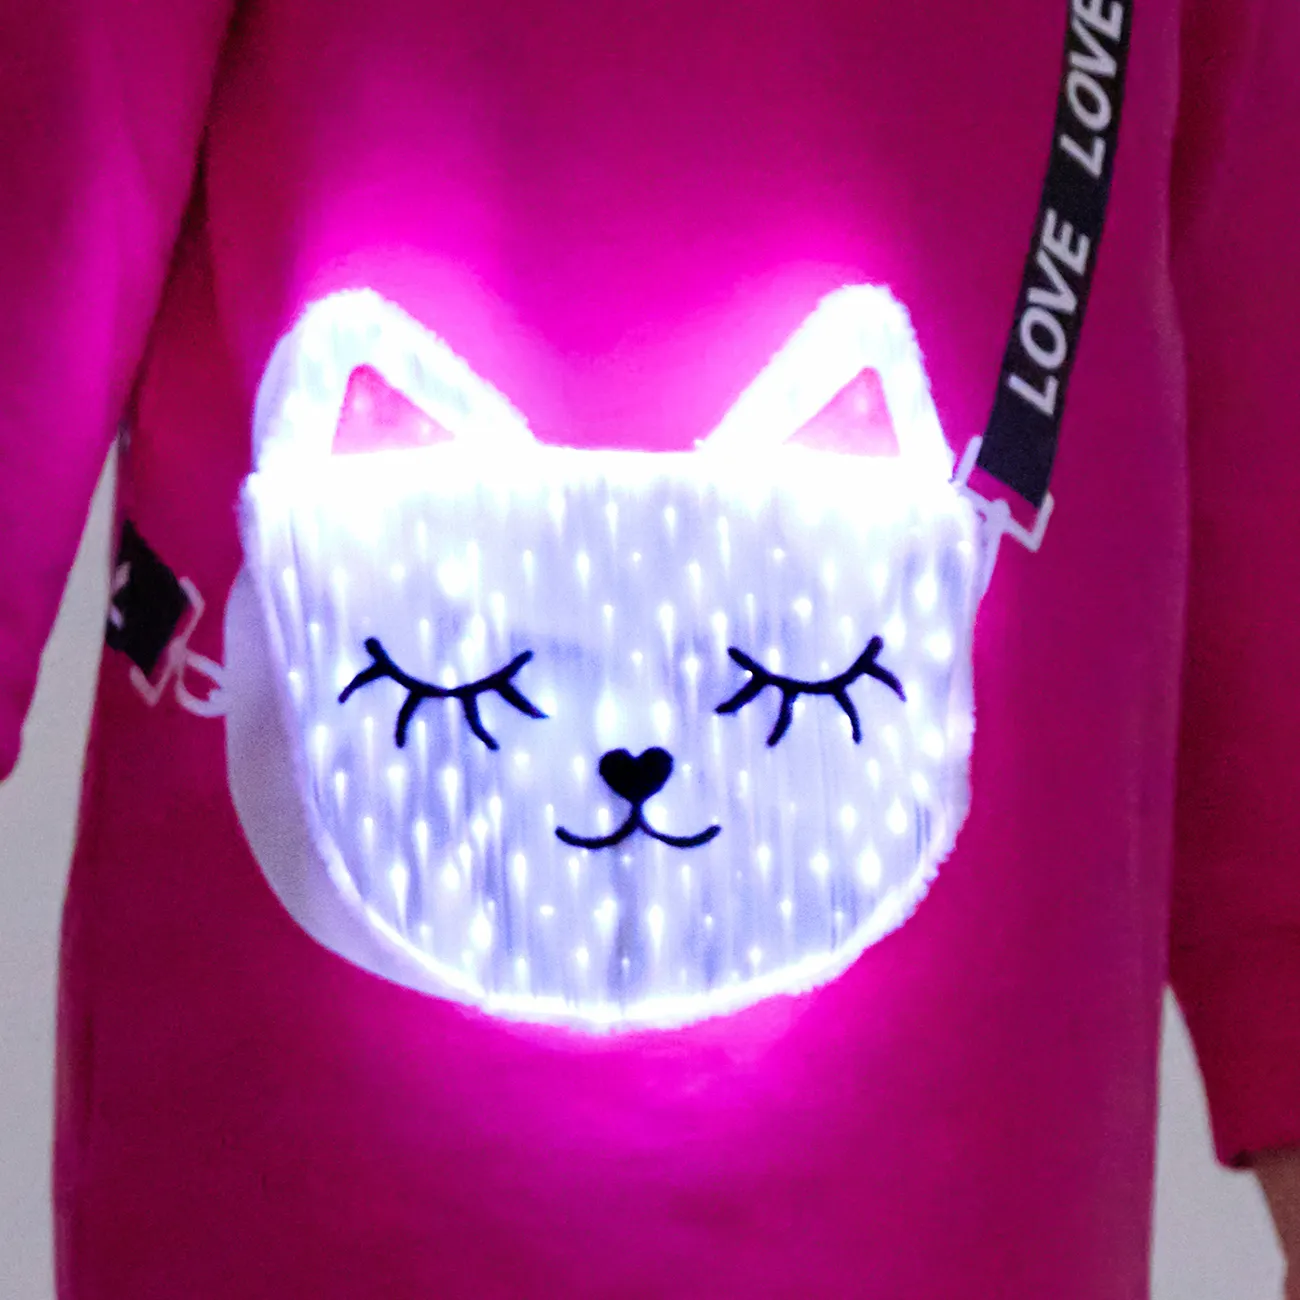 Go-Glow Illuminating Sweatshirt Dress with Light Up Kitty Bag Including Controller (Built-In Battery) Hot Pink big image 1